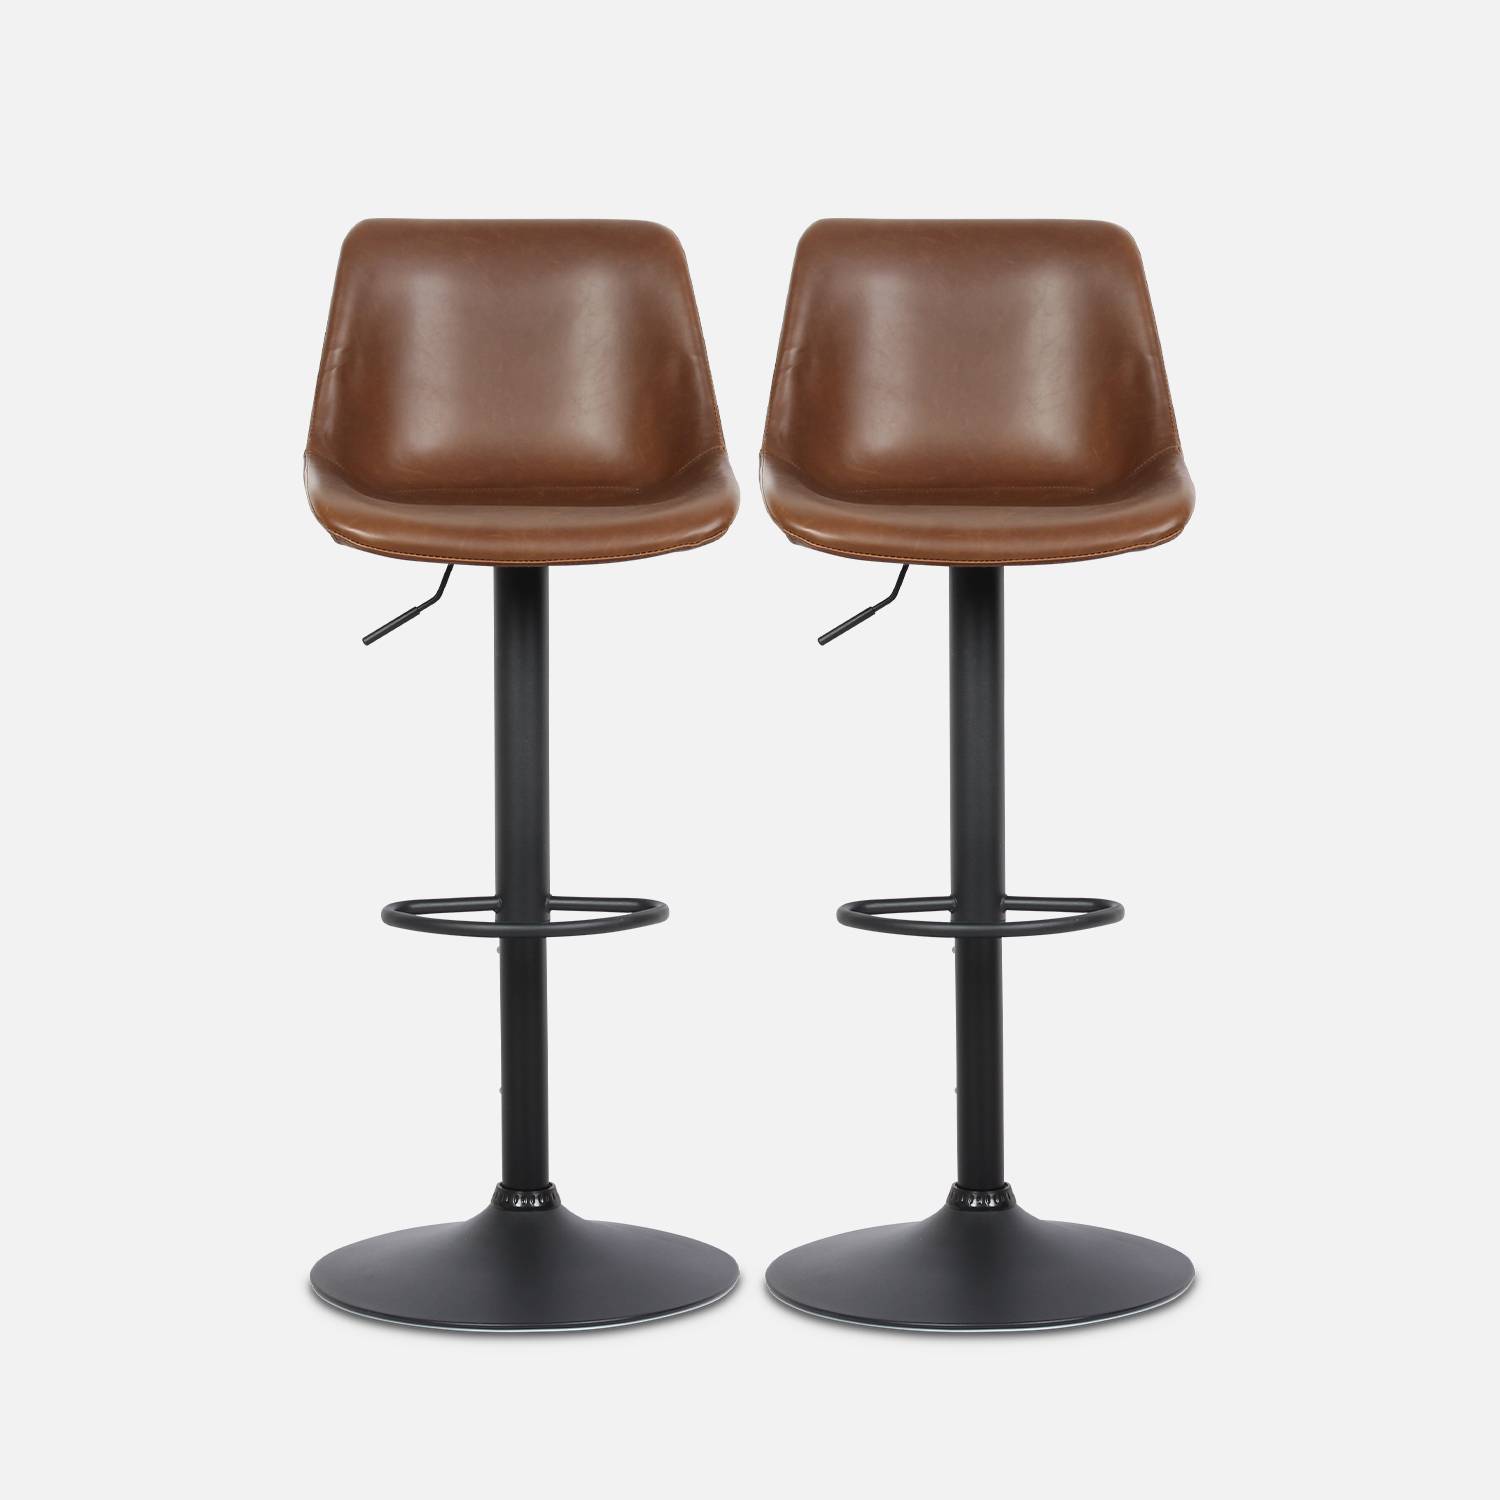 Pair of faux leather, square backrest, adjustable bar stools, seat height 61.5 - 83.5cm - Noah - Brown Photo4